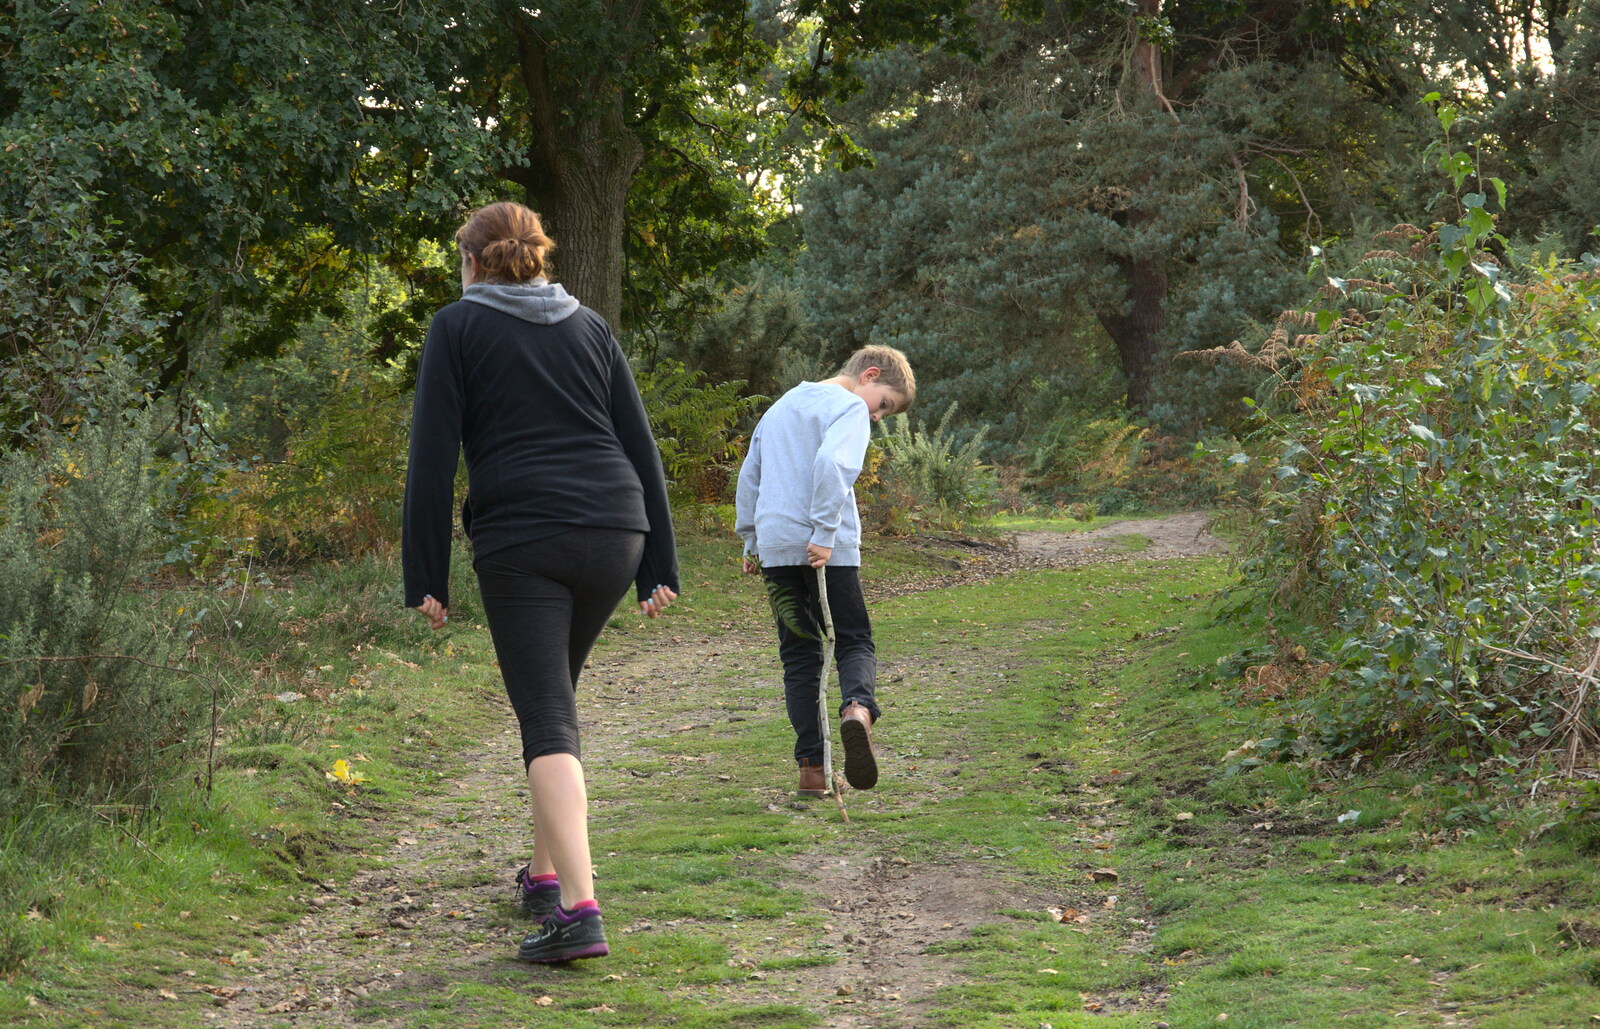 Isobel and Fred, who's drawing a trail with a stick from Evidence of Autumn: Geocaching on Knettishall Heath, Suffolk - 7th October 2018